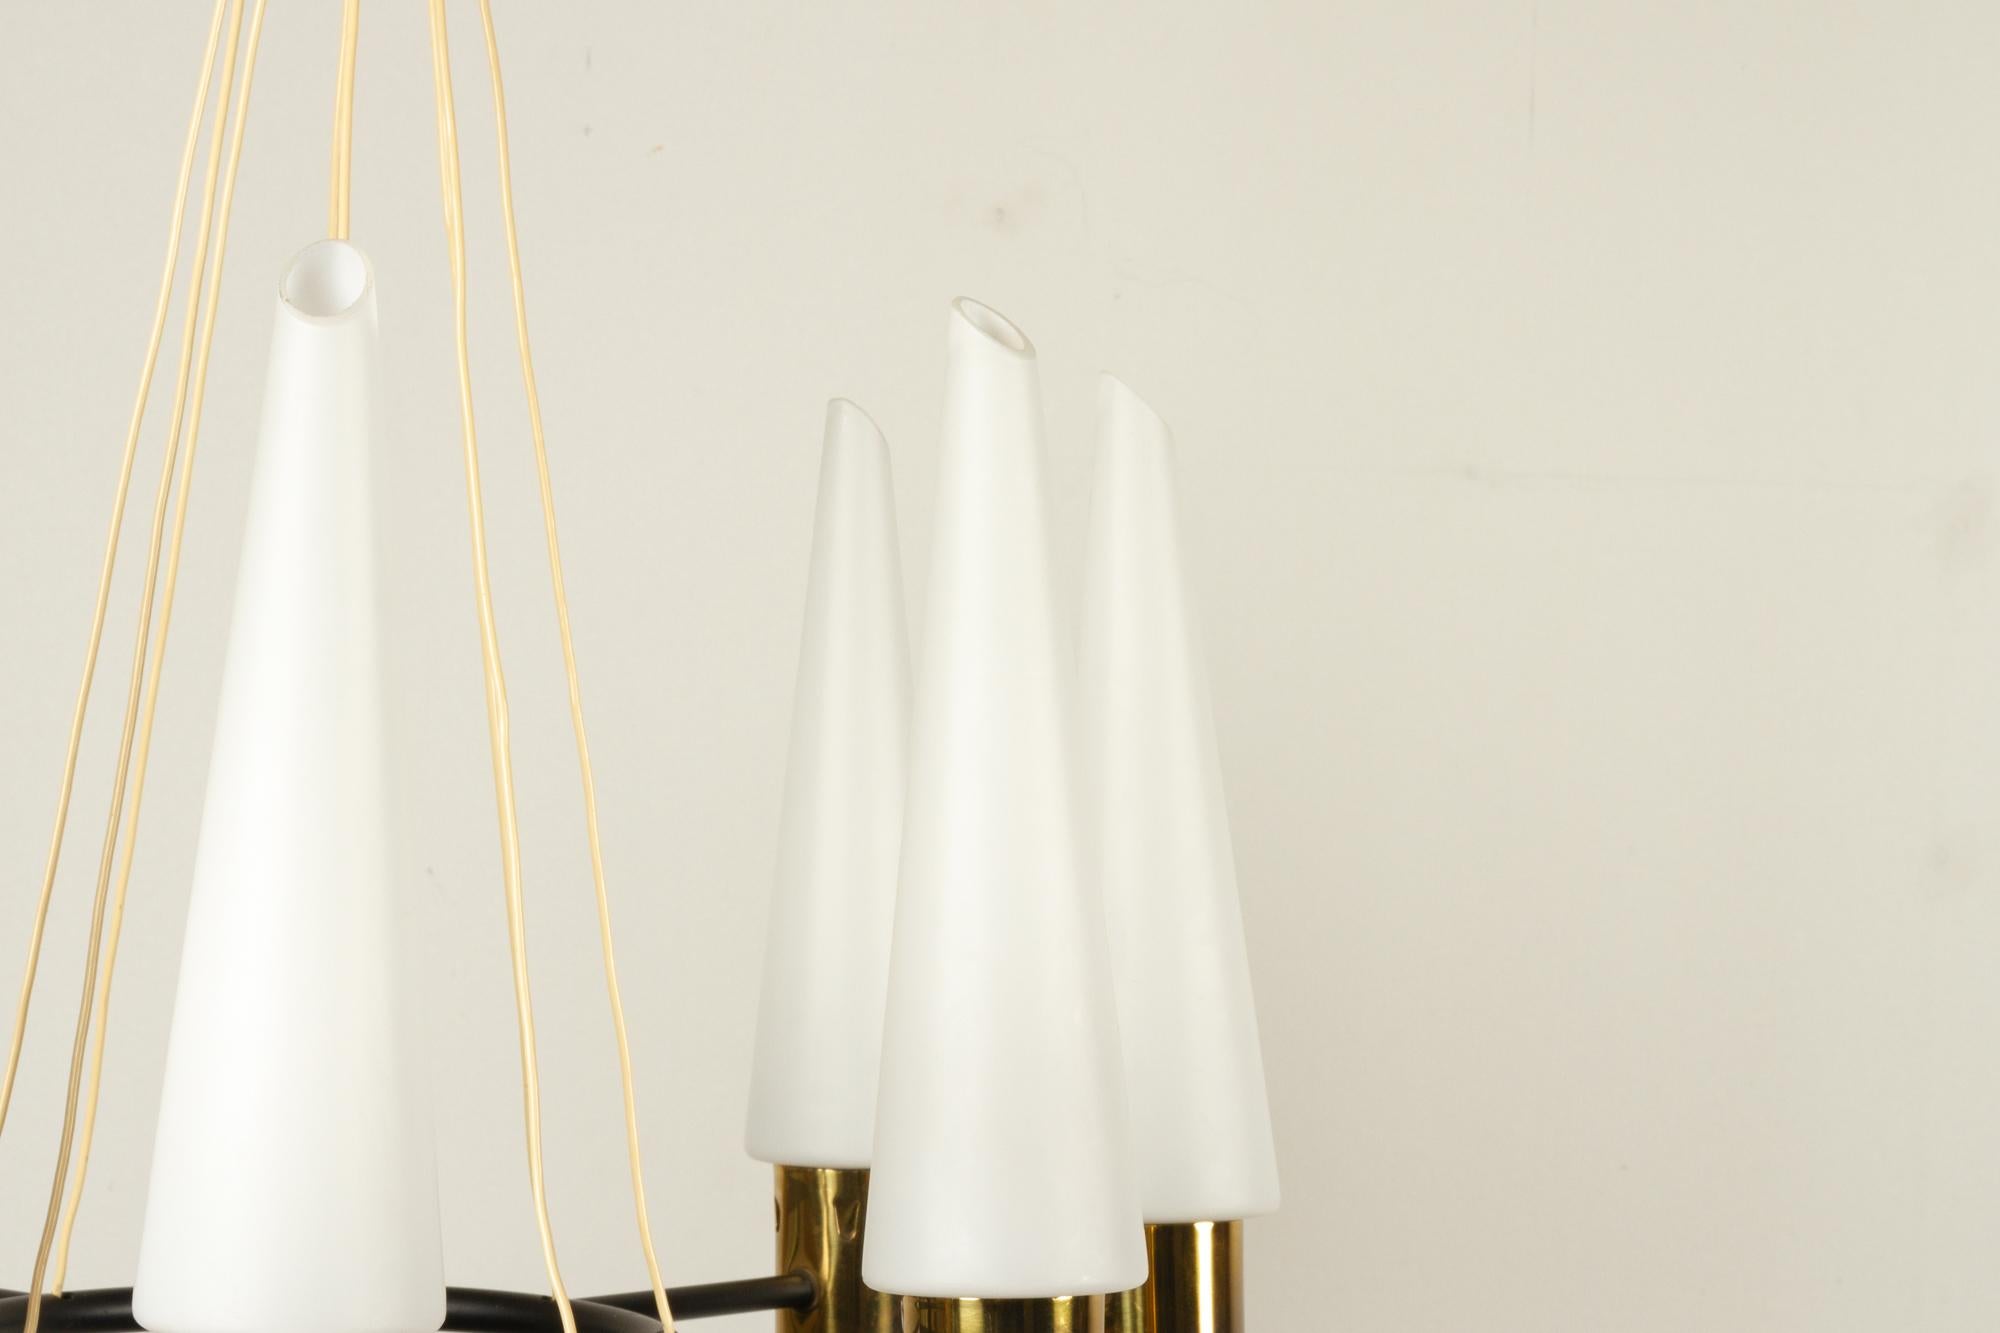 Vintage Midcentury Brass Chandelier with Opal Glass Shades, 1960s For Sale 3